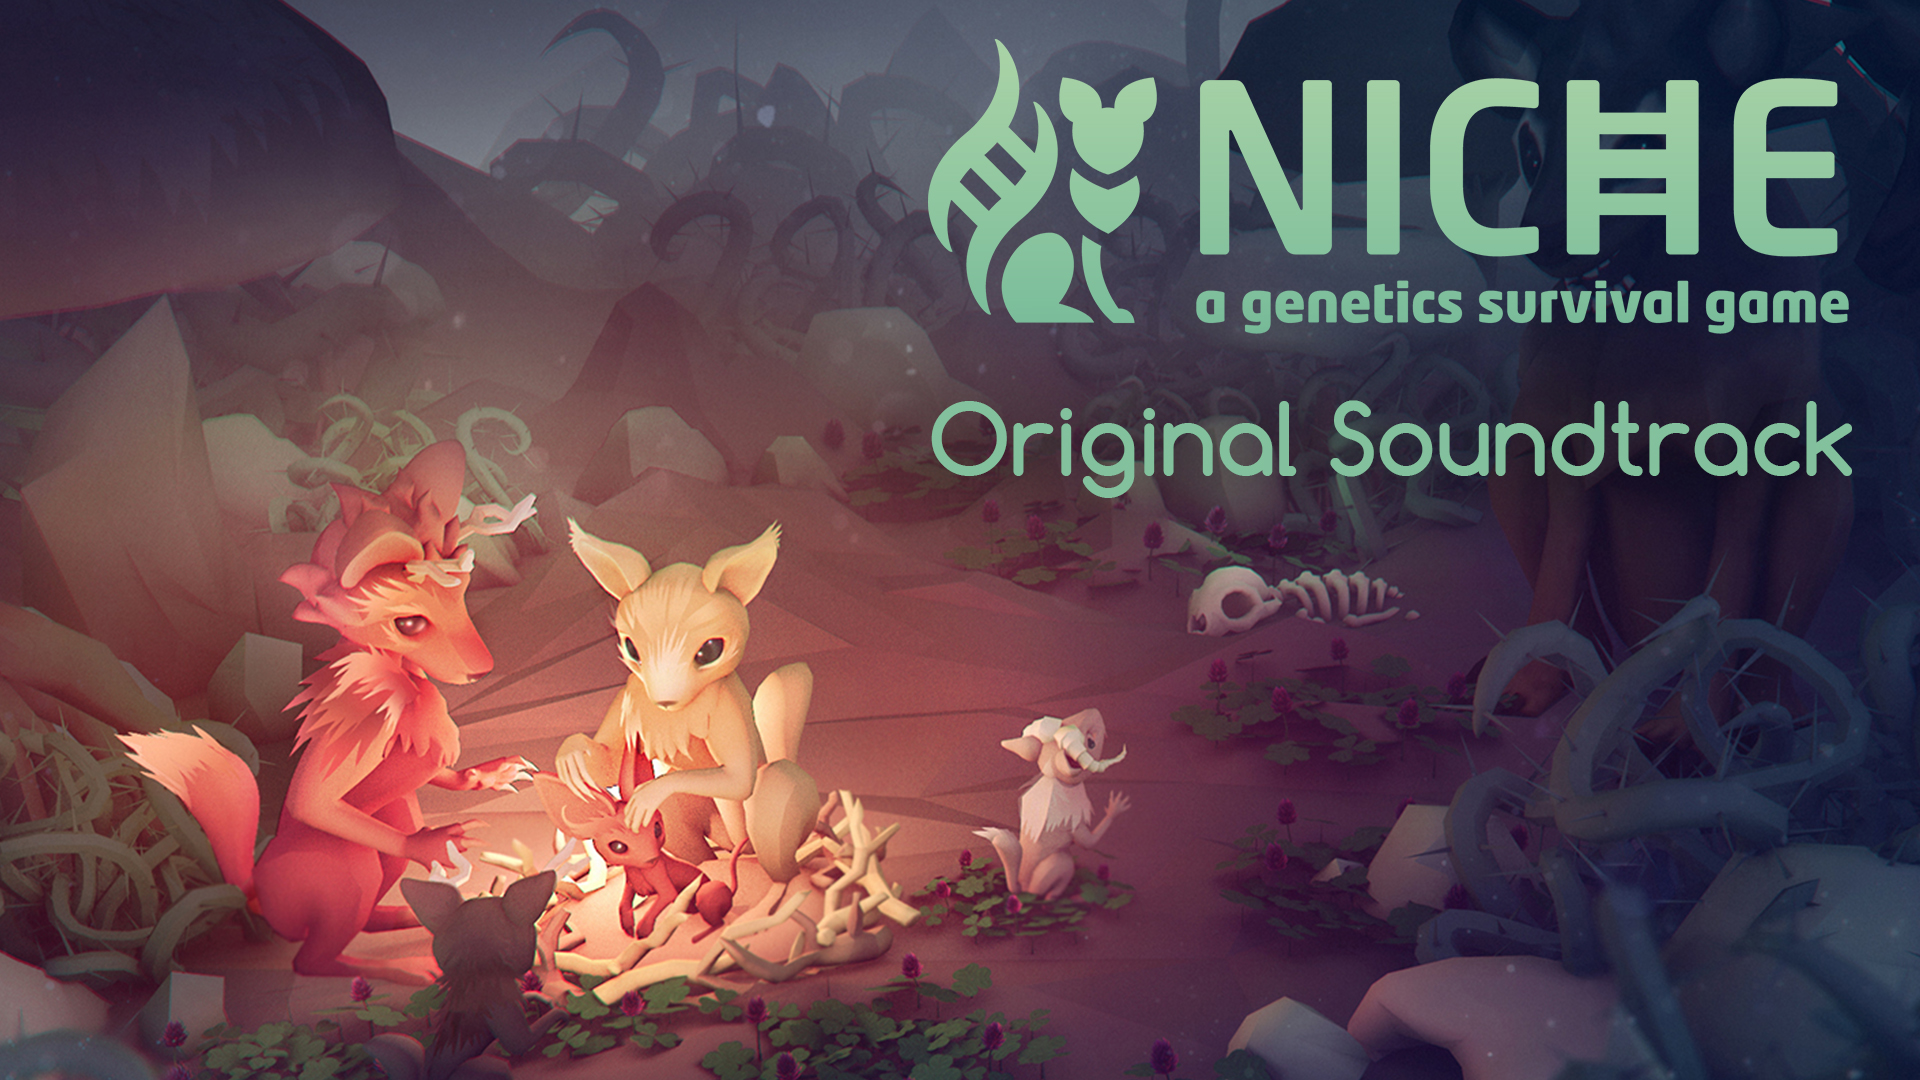 Niche - a genetic survival game Soundtrack Featured Screenshot #1